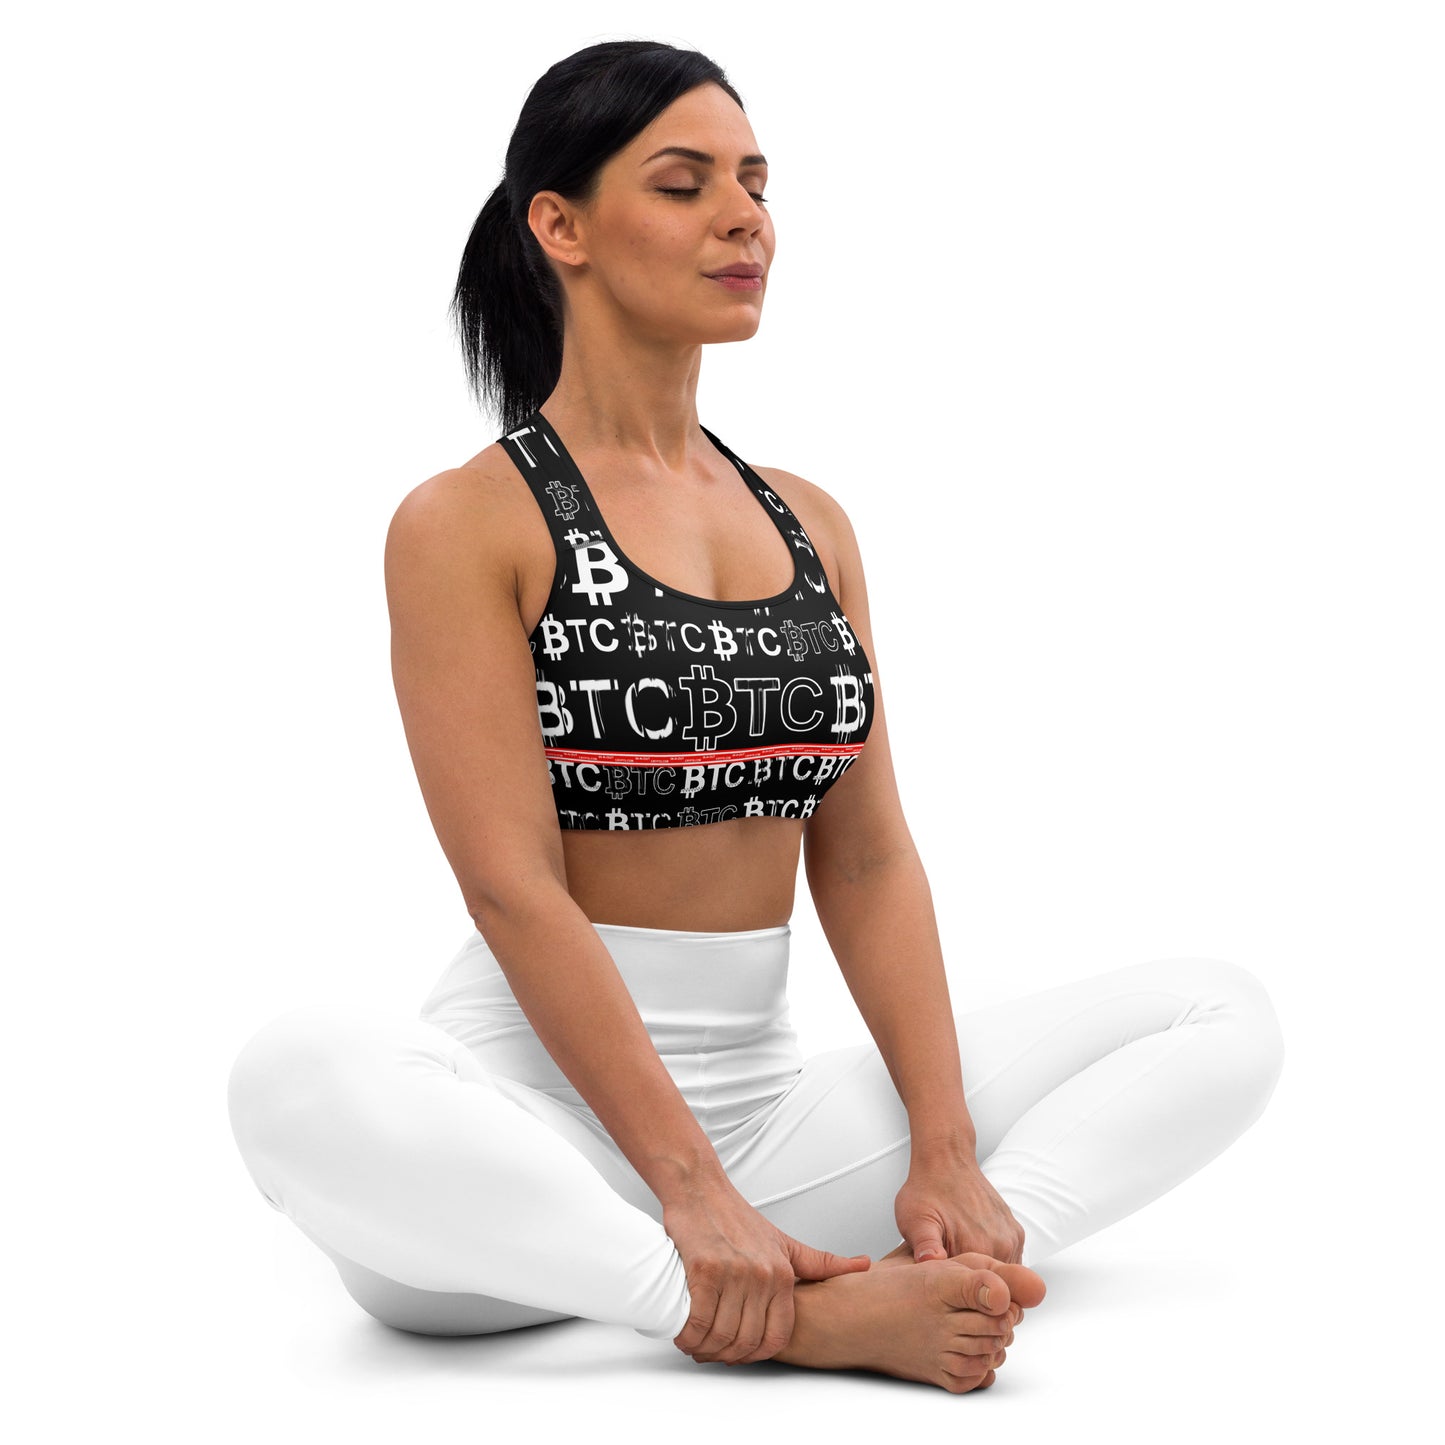 In N Out Crypto Btc Sports Bra